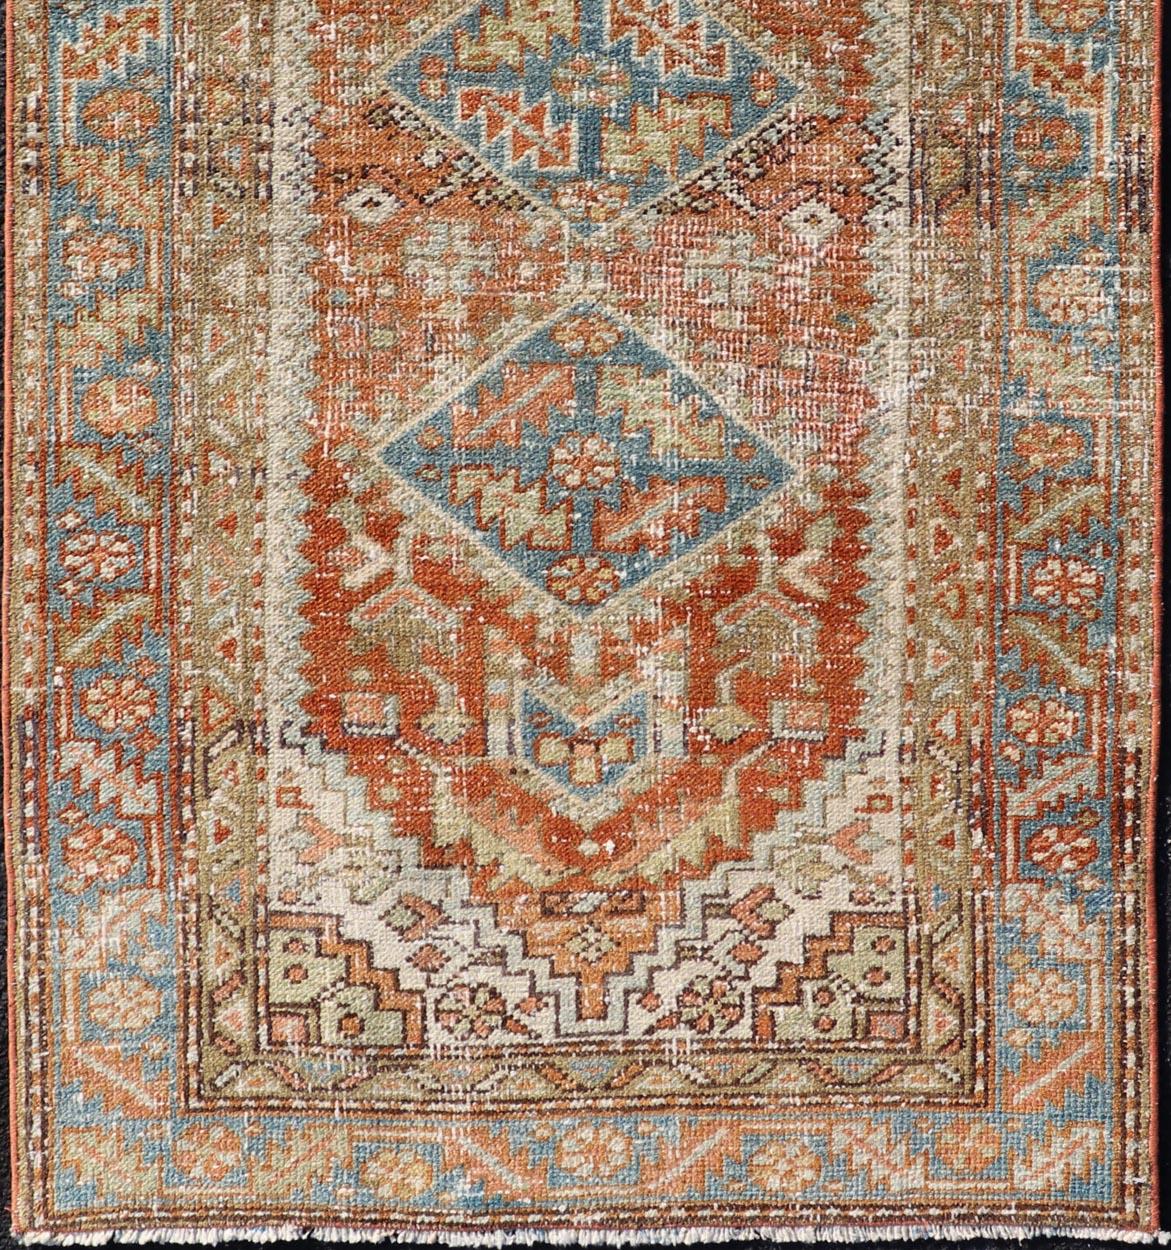 Antique Persian Heriz Rug with Geometric Medallion Design in Red, Olive, Blue In Good Condition For Sale In Atlanta, GA